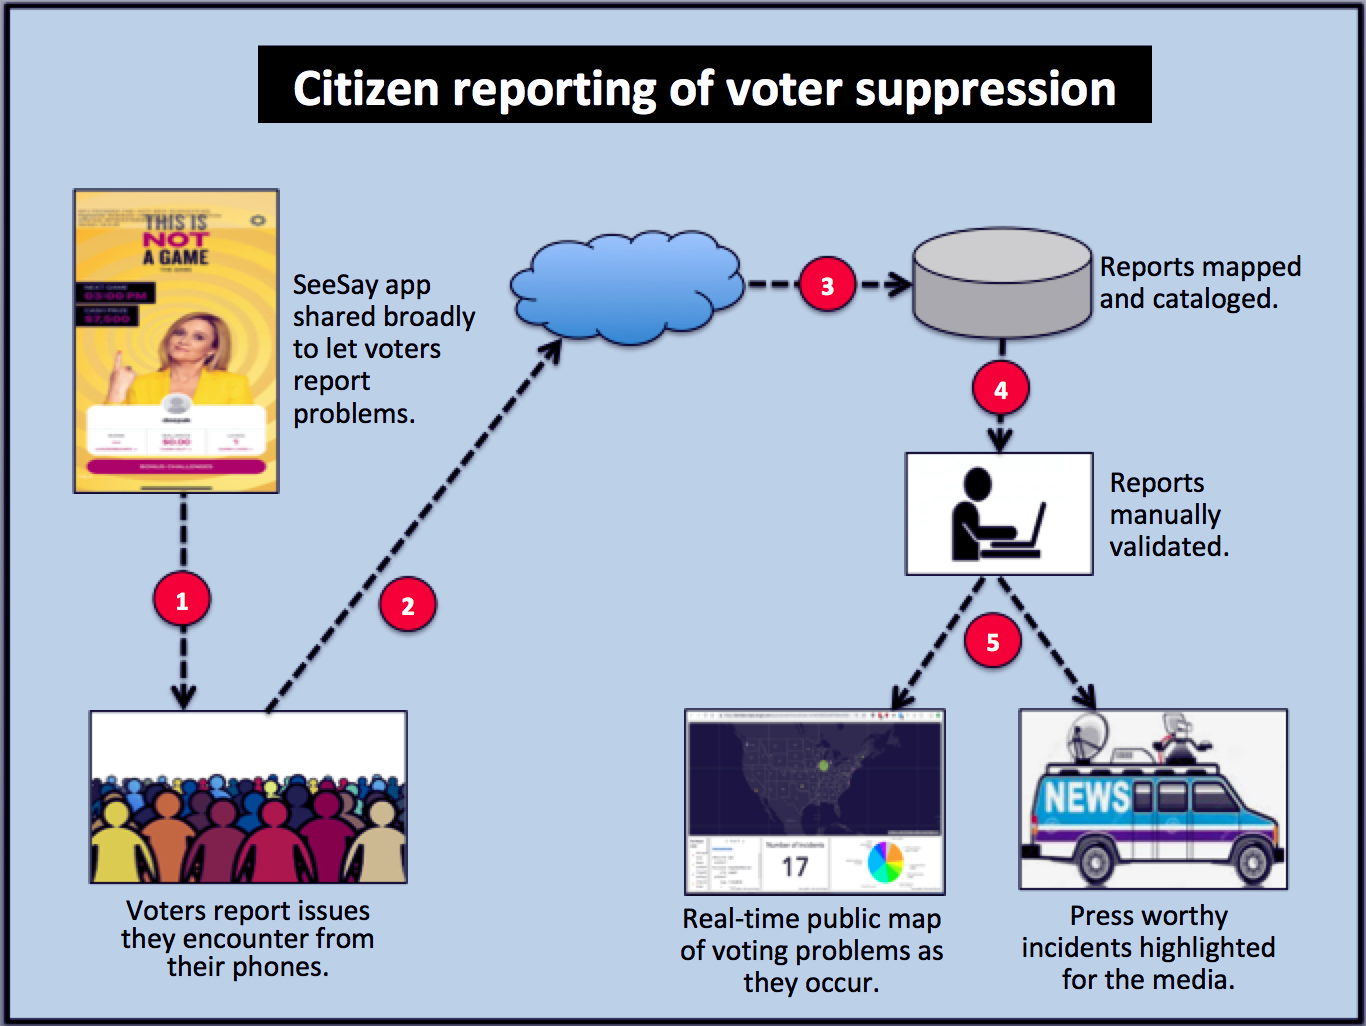 Citizen reporting of voter suppression incidents with See Say